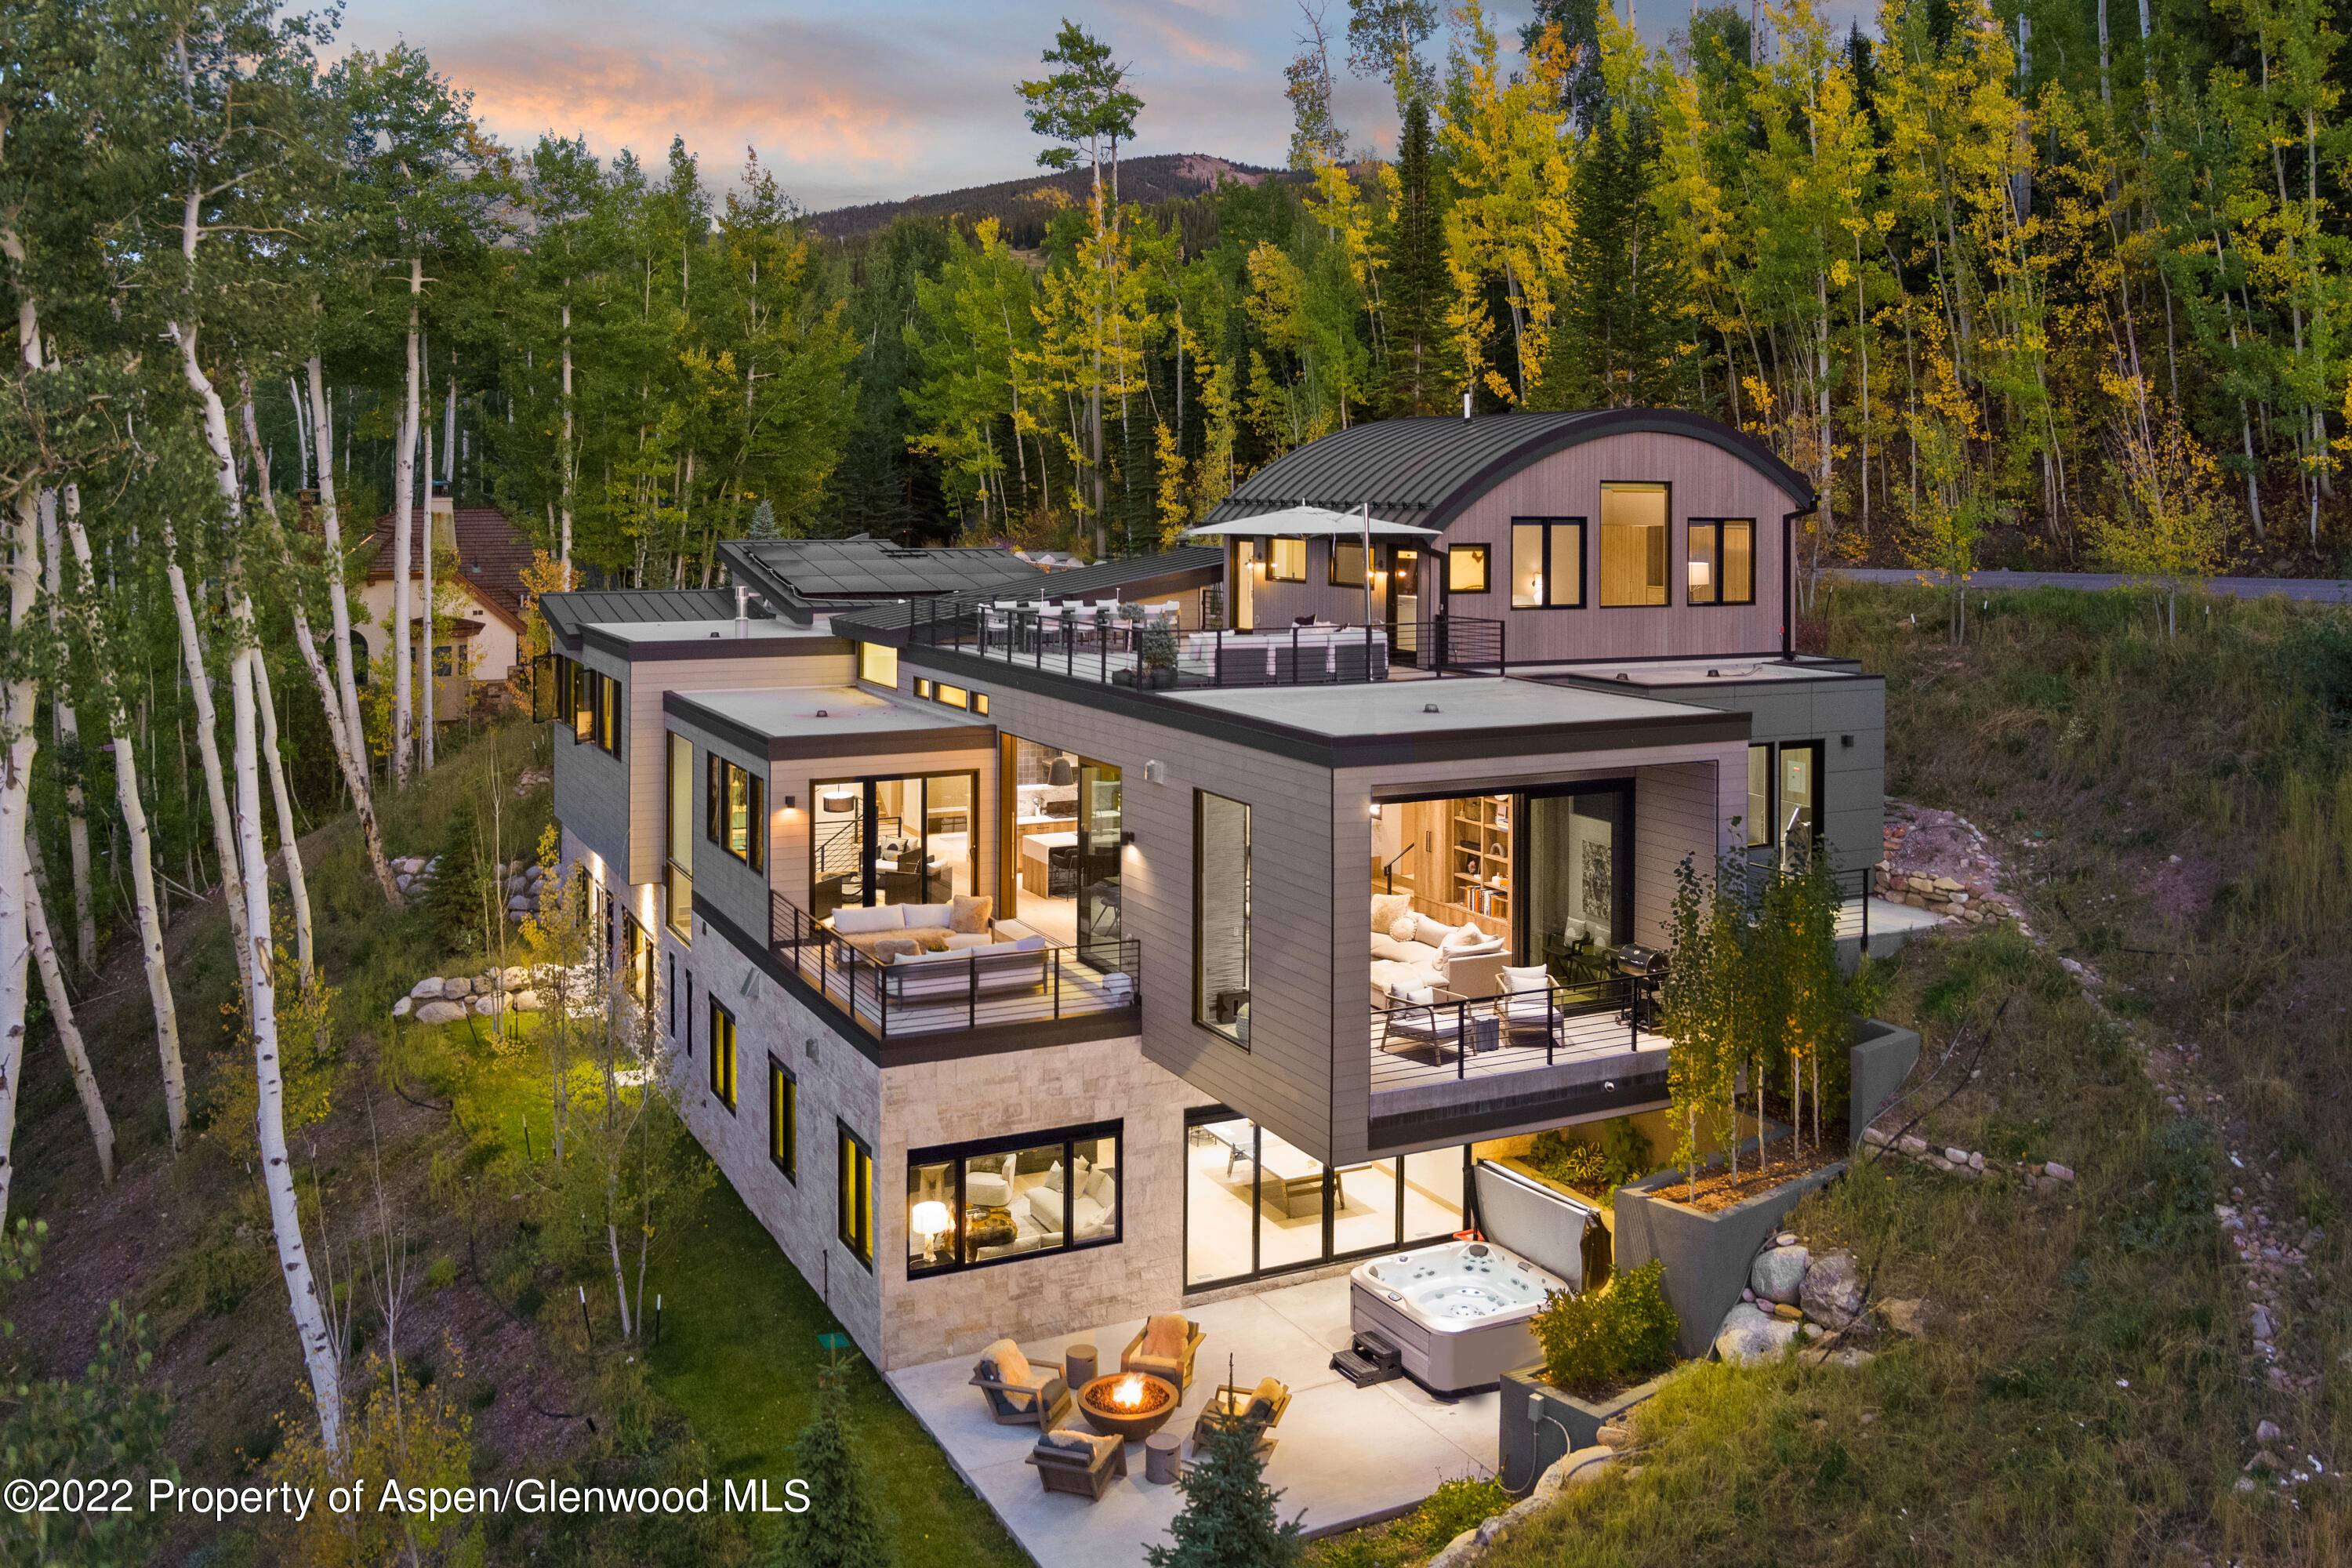 Located off the Guggenheim ski run in Snowmass, this gorgeous newly constructed, mountain contemporary home awaits you with extensive west to east views of the Snowmass Valley.